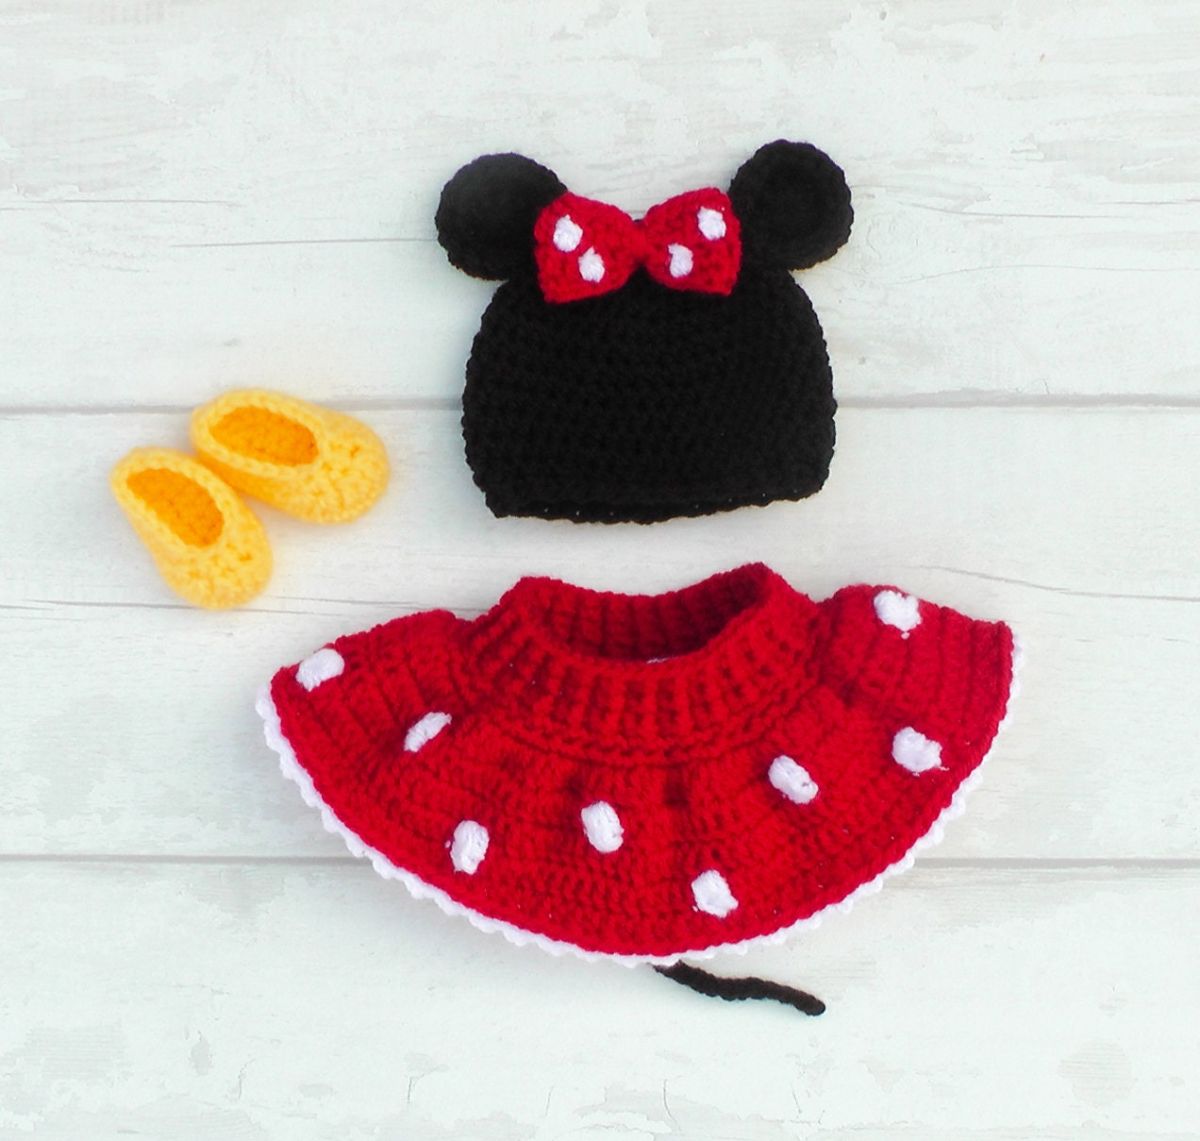 Crochet Minnie Mouse baby costume with a red skirt with white spots, yellow slip on shoes, and a black and white beanie with a red and white bow and mouse ears.